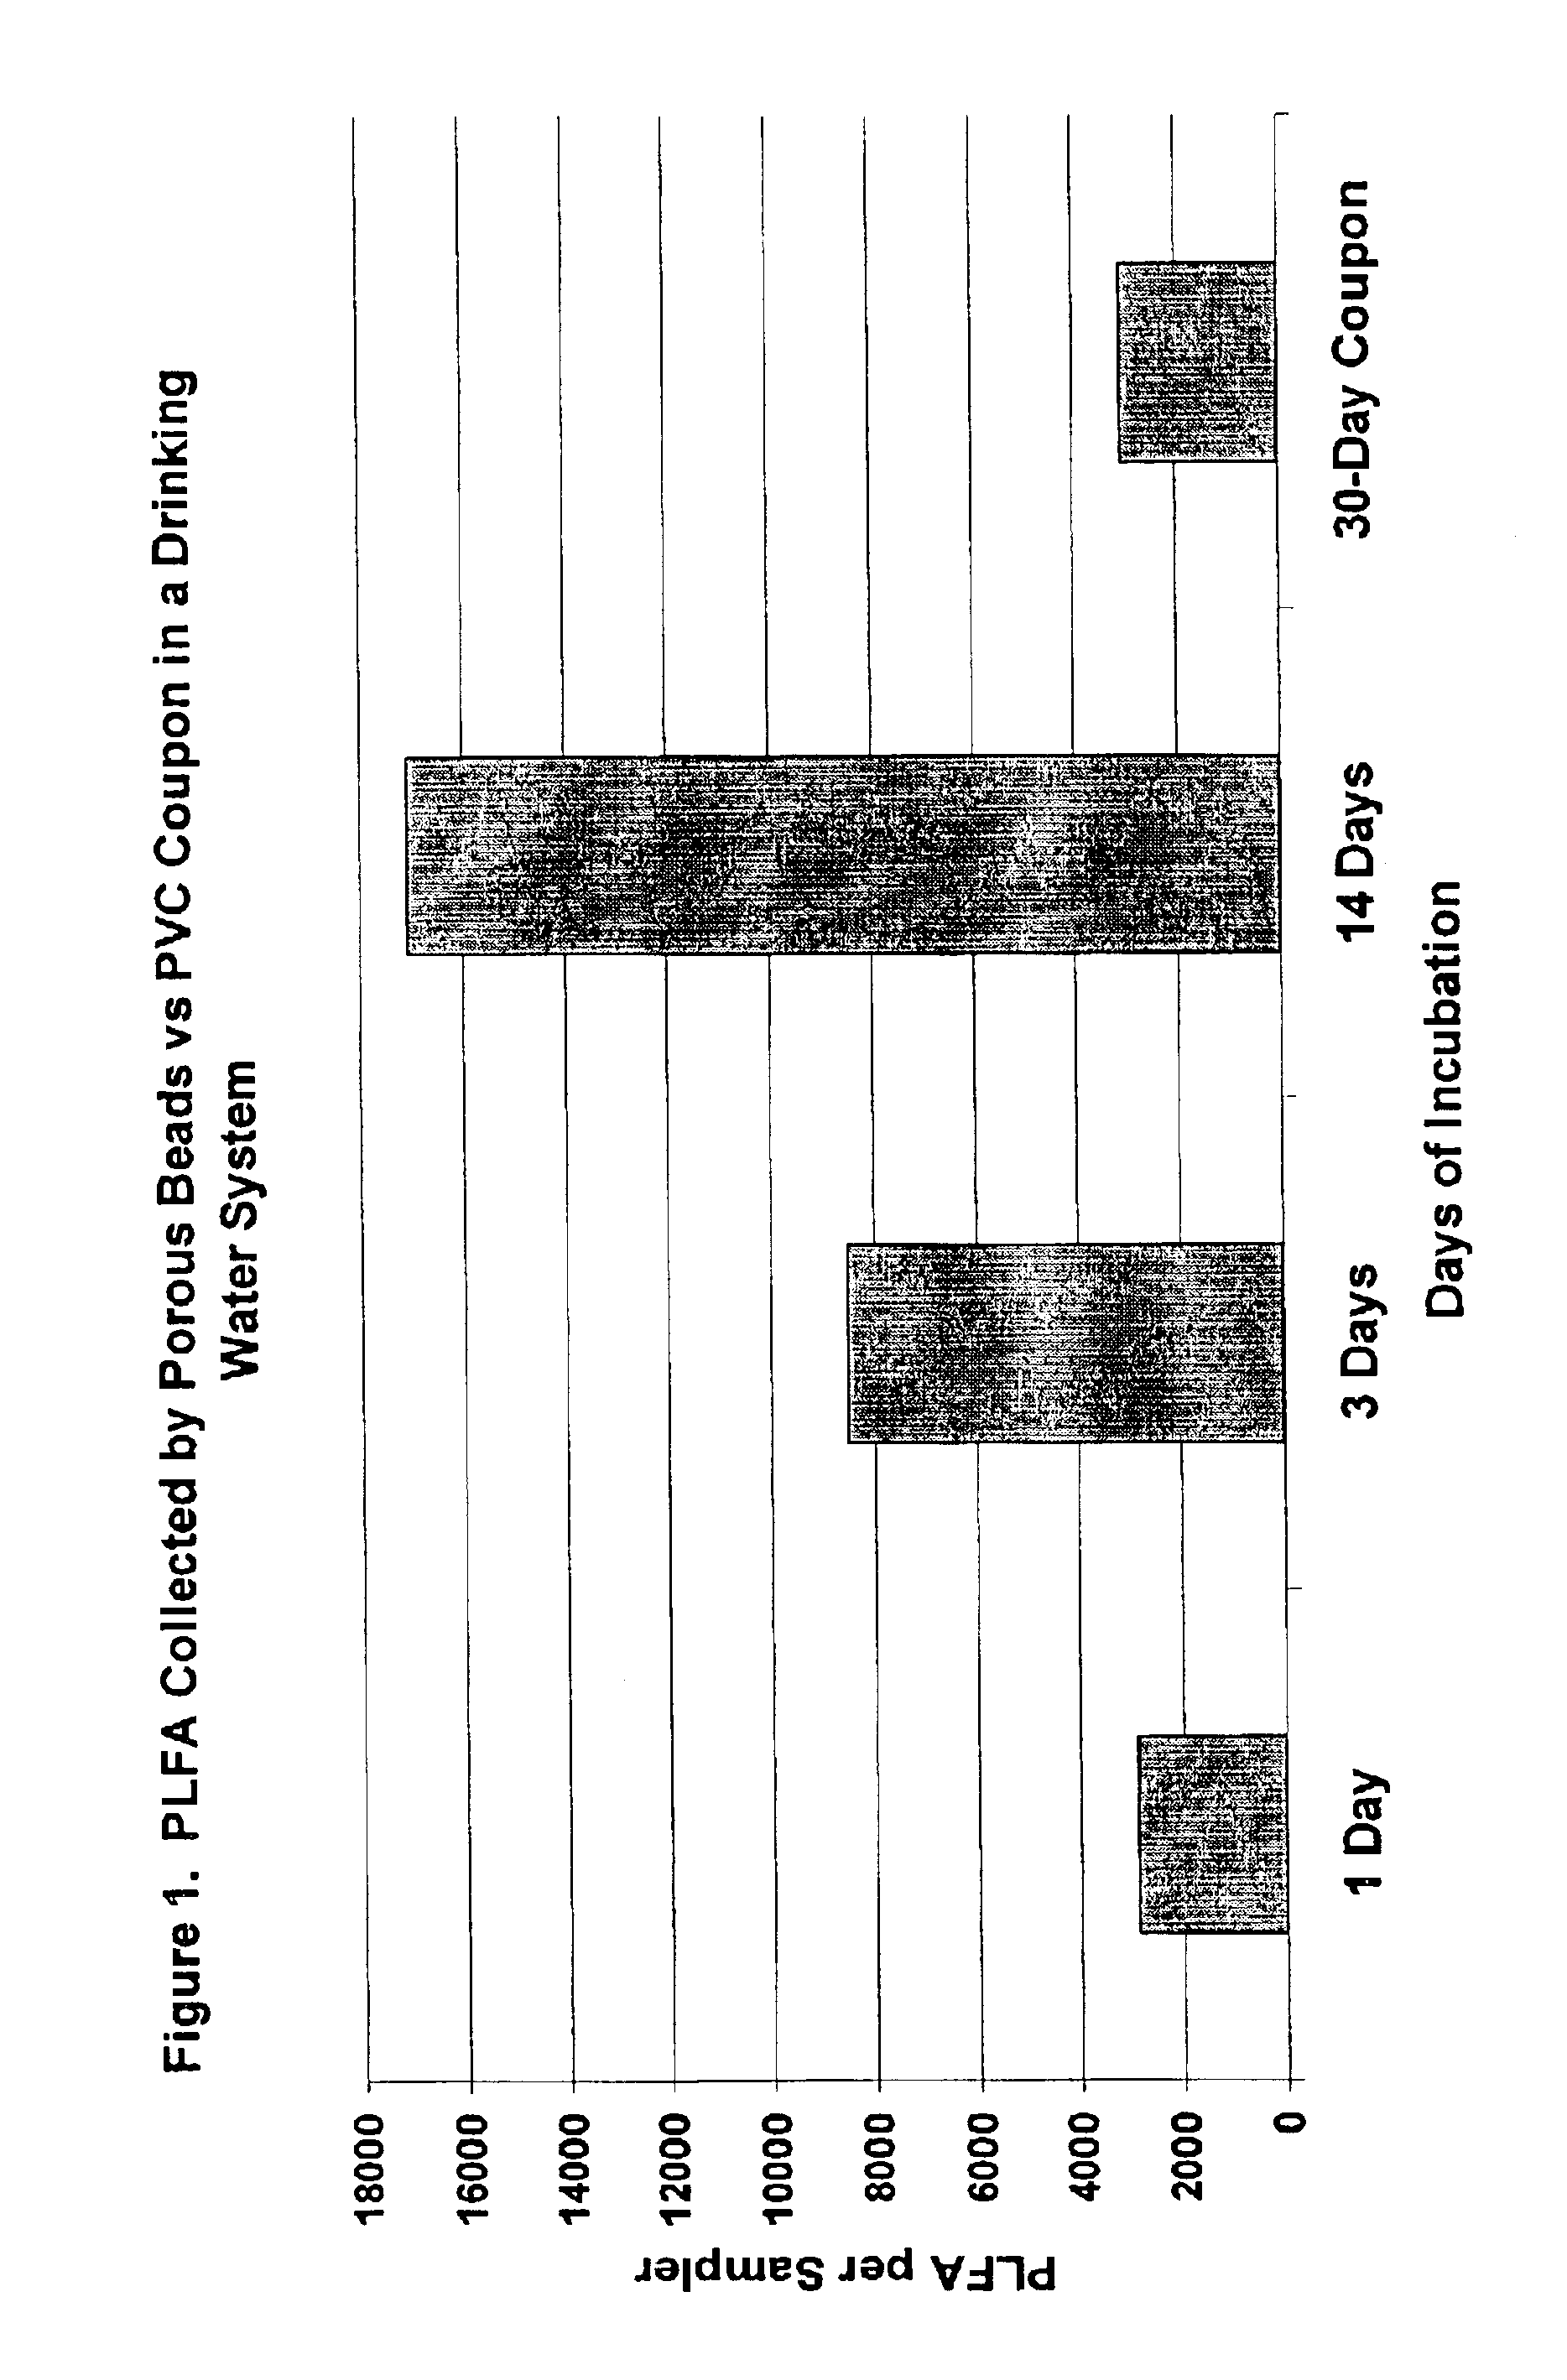 Methods for forming microcultures within porous media